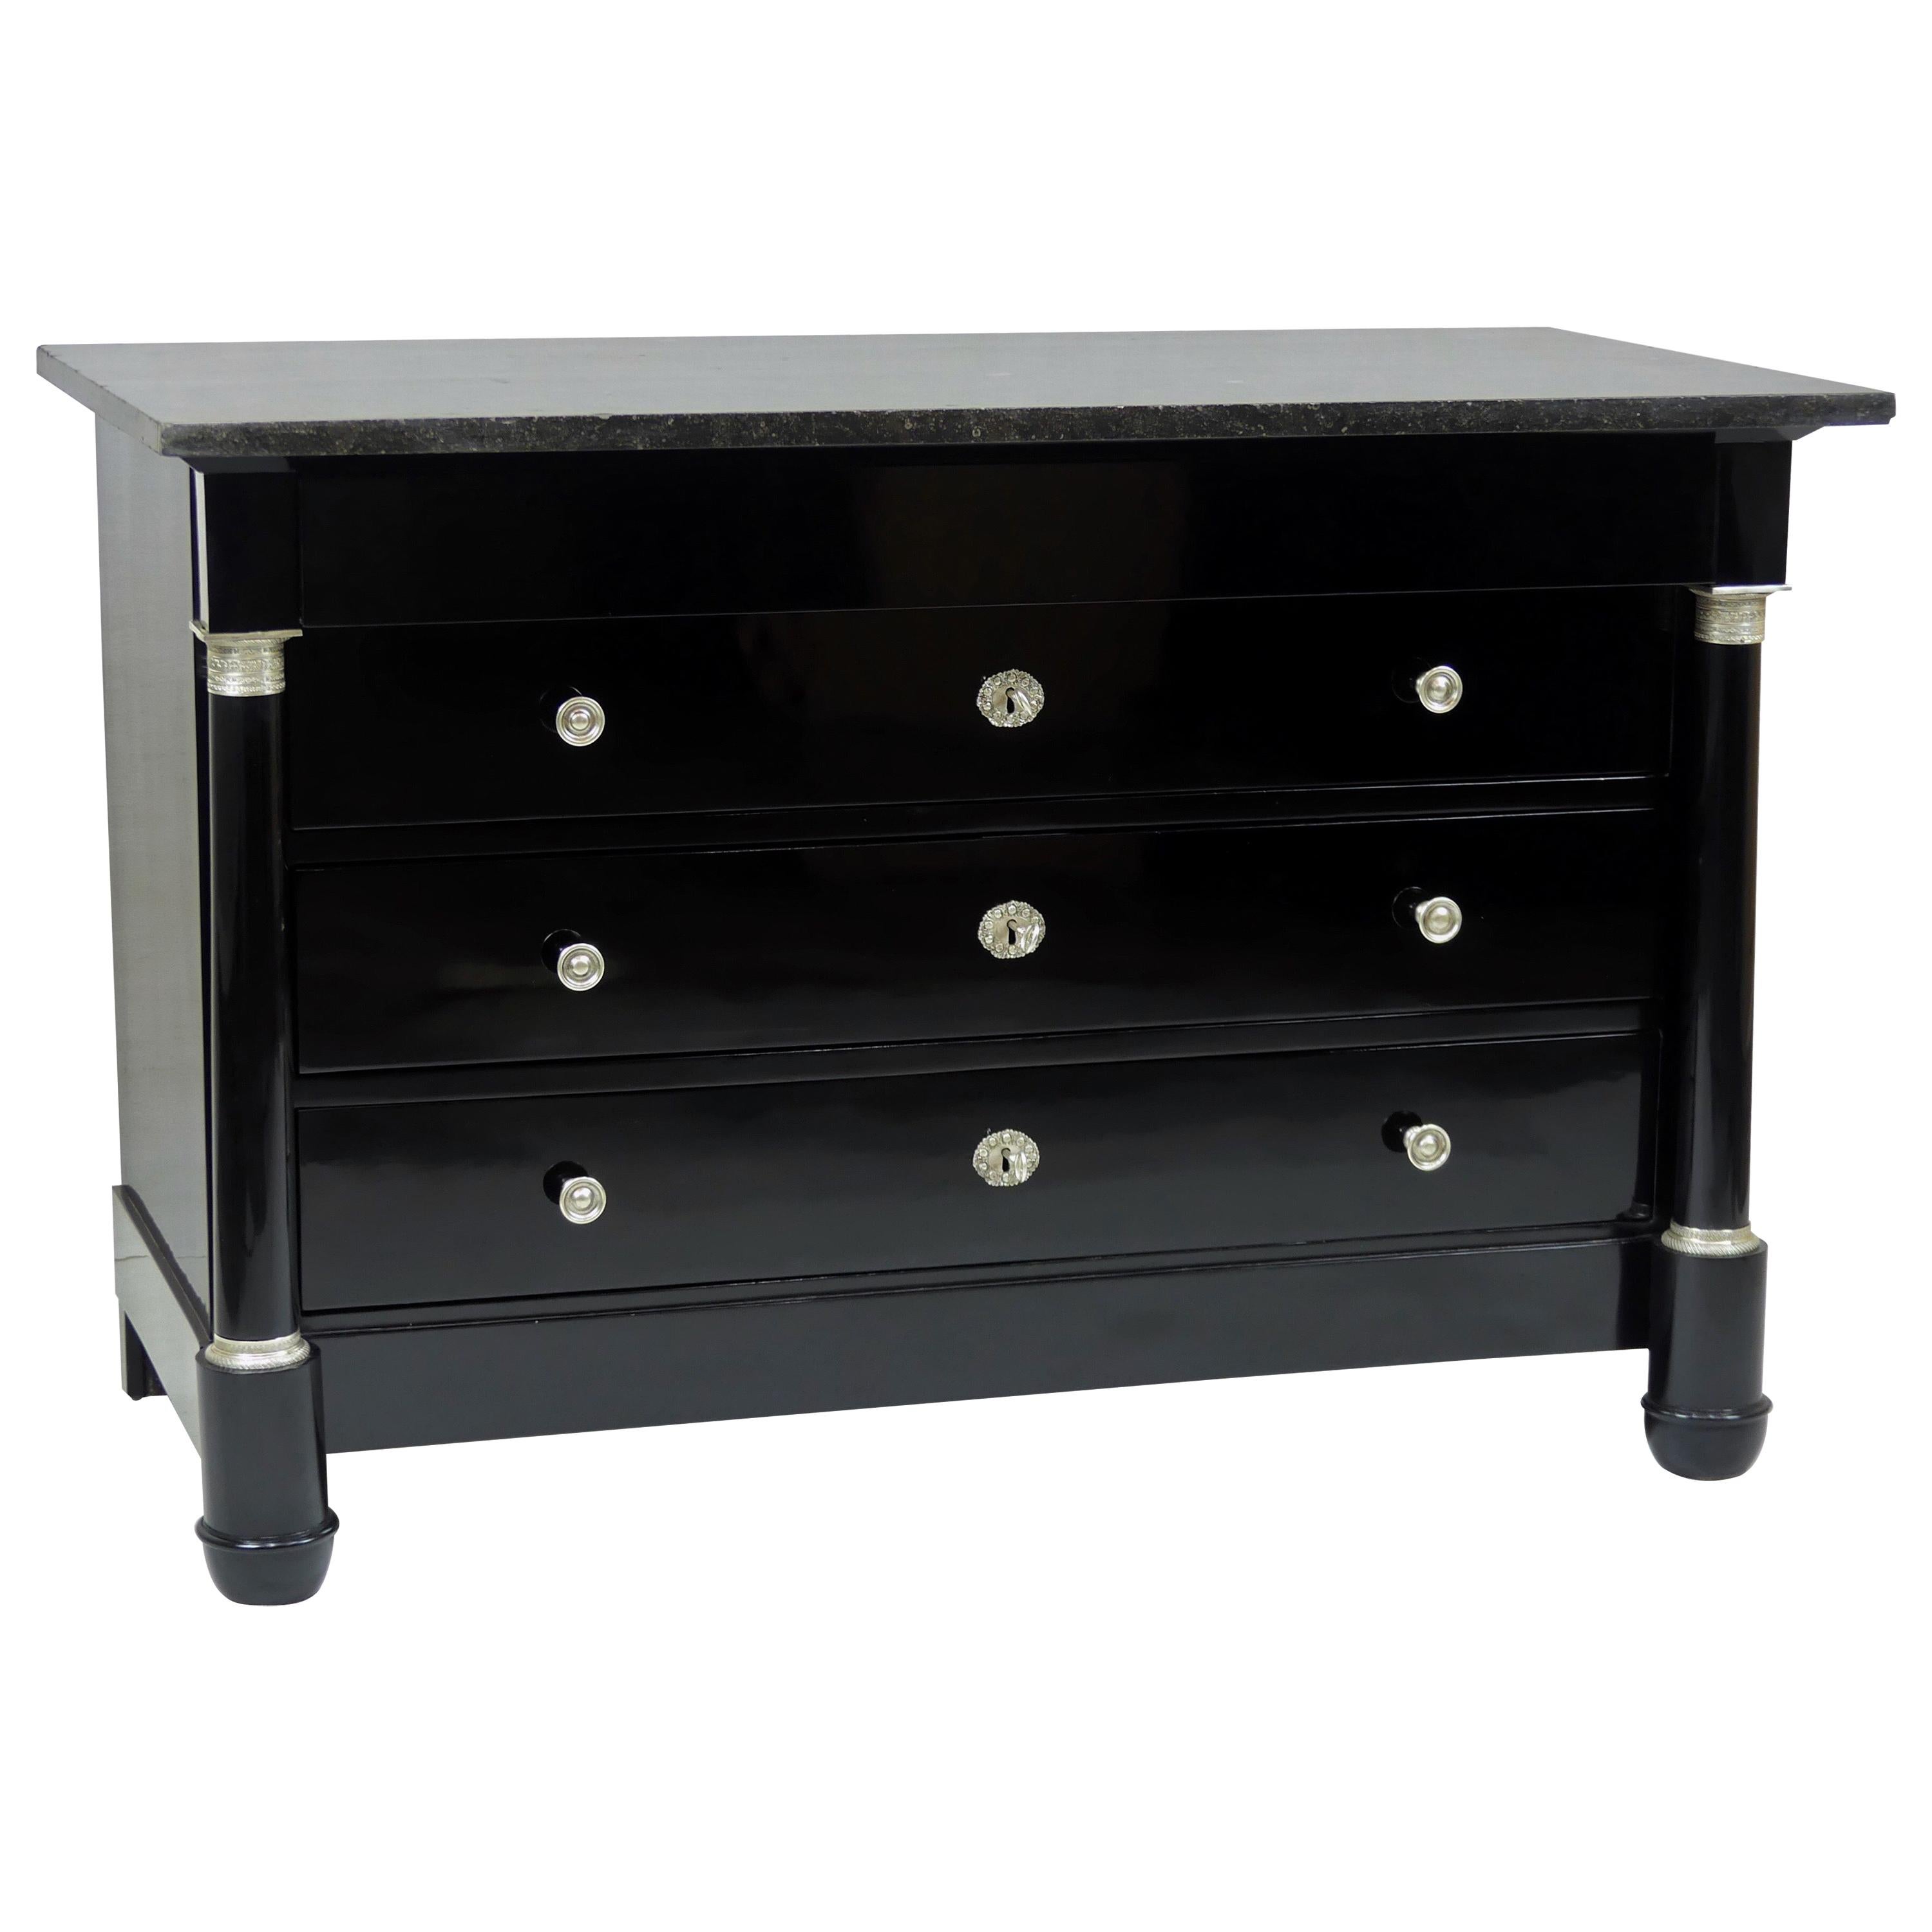 Antique Black Ebonized Silver Empire Chest of Drawers from France, 19th Century For Sale